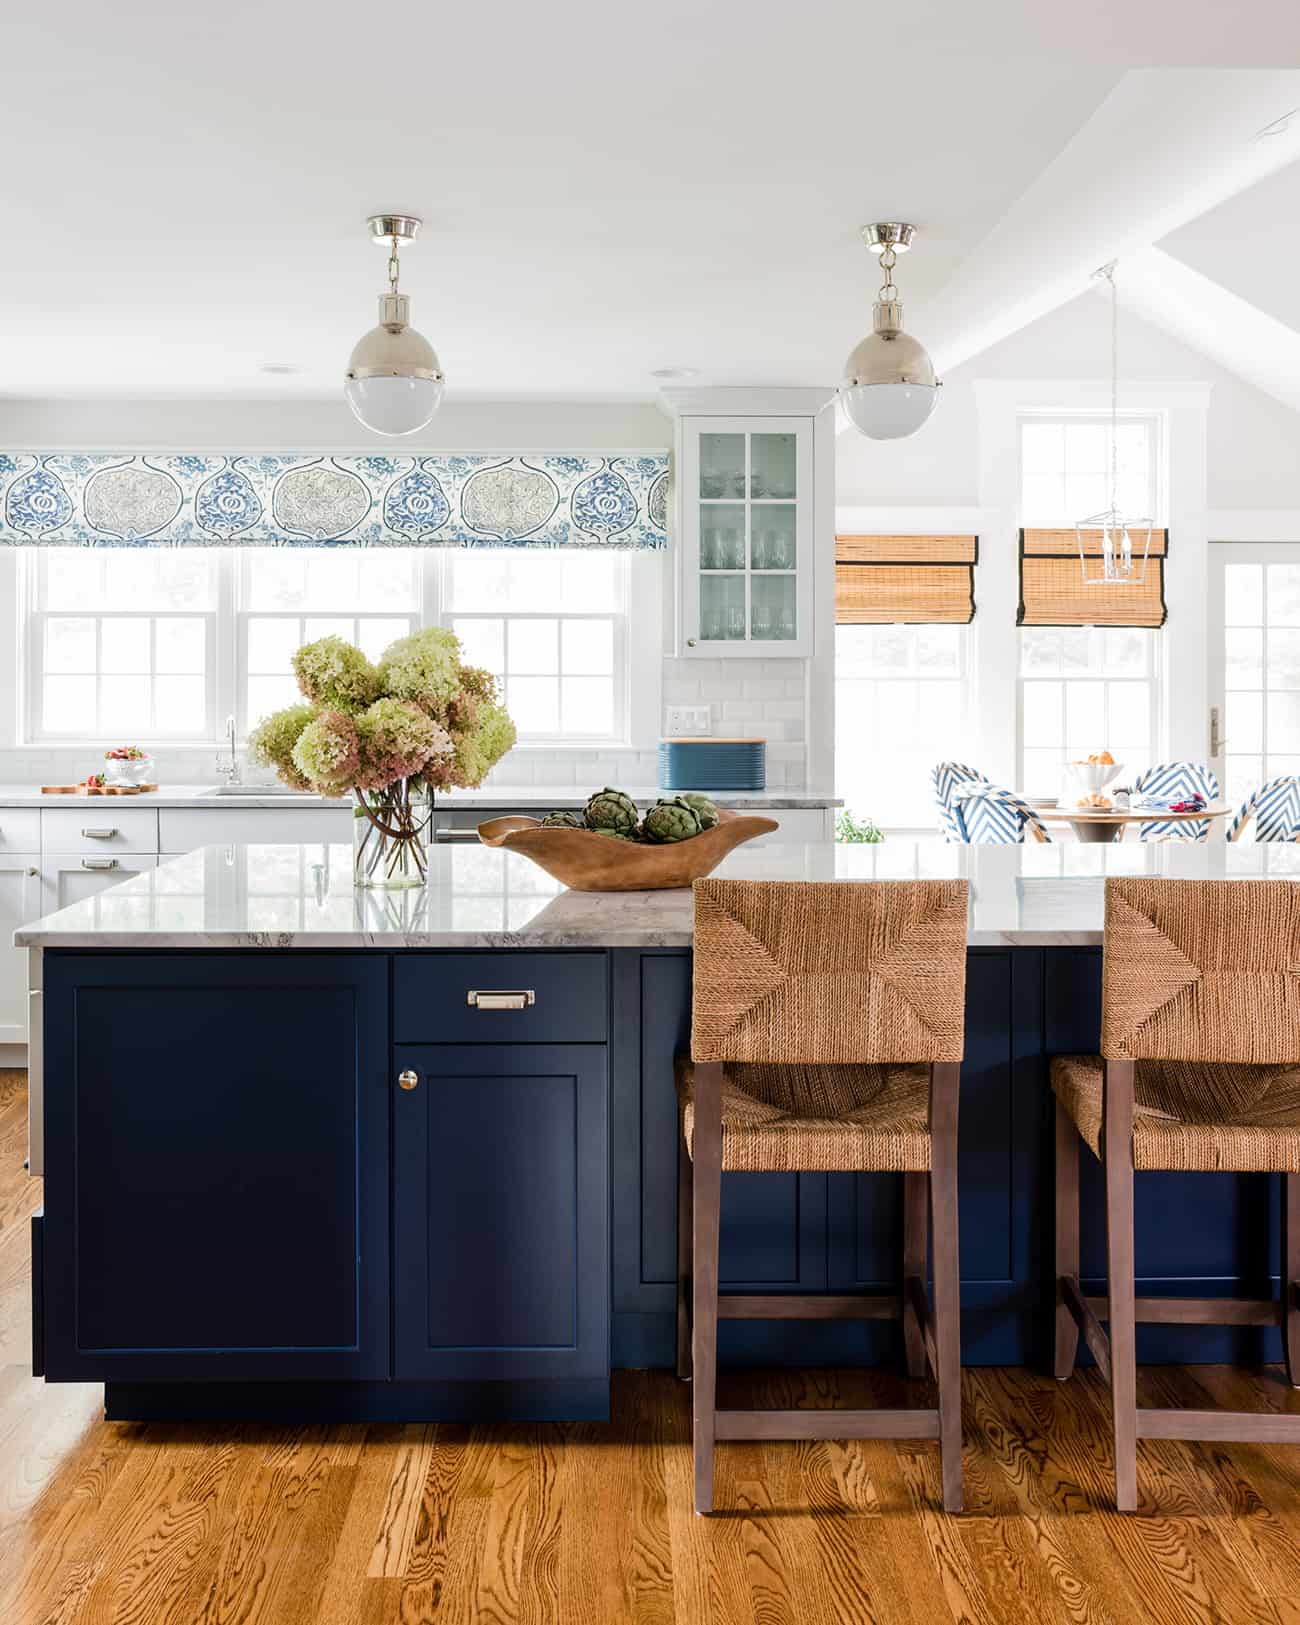 Coastal chic kitchen with large center island painted in Sherwin Williams Naval with white marble countertop. 